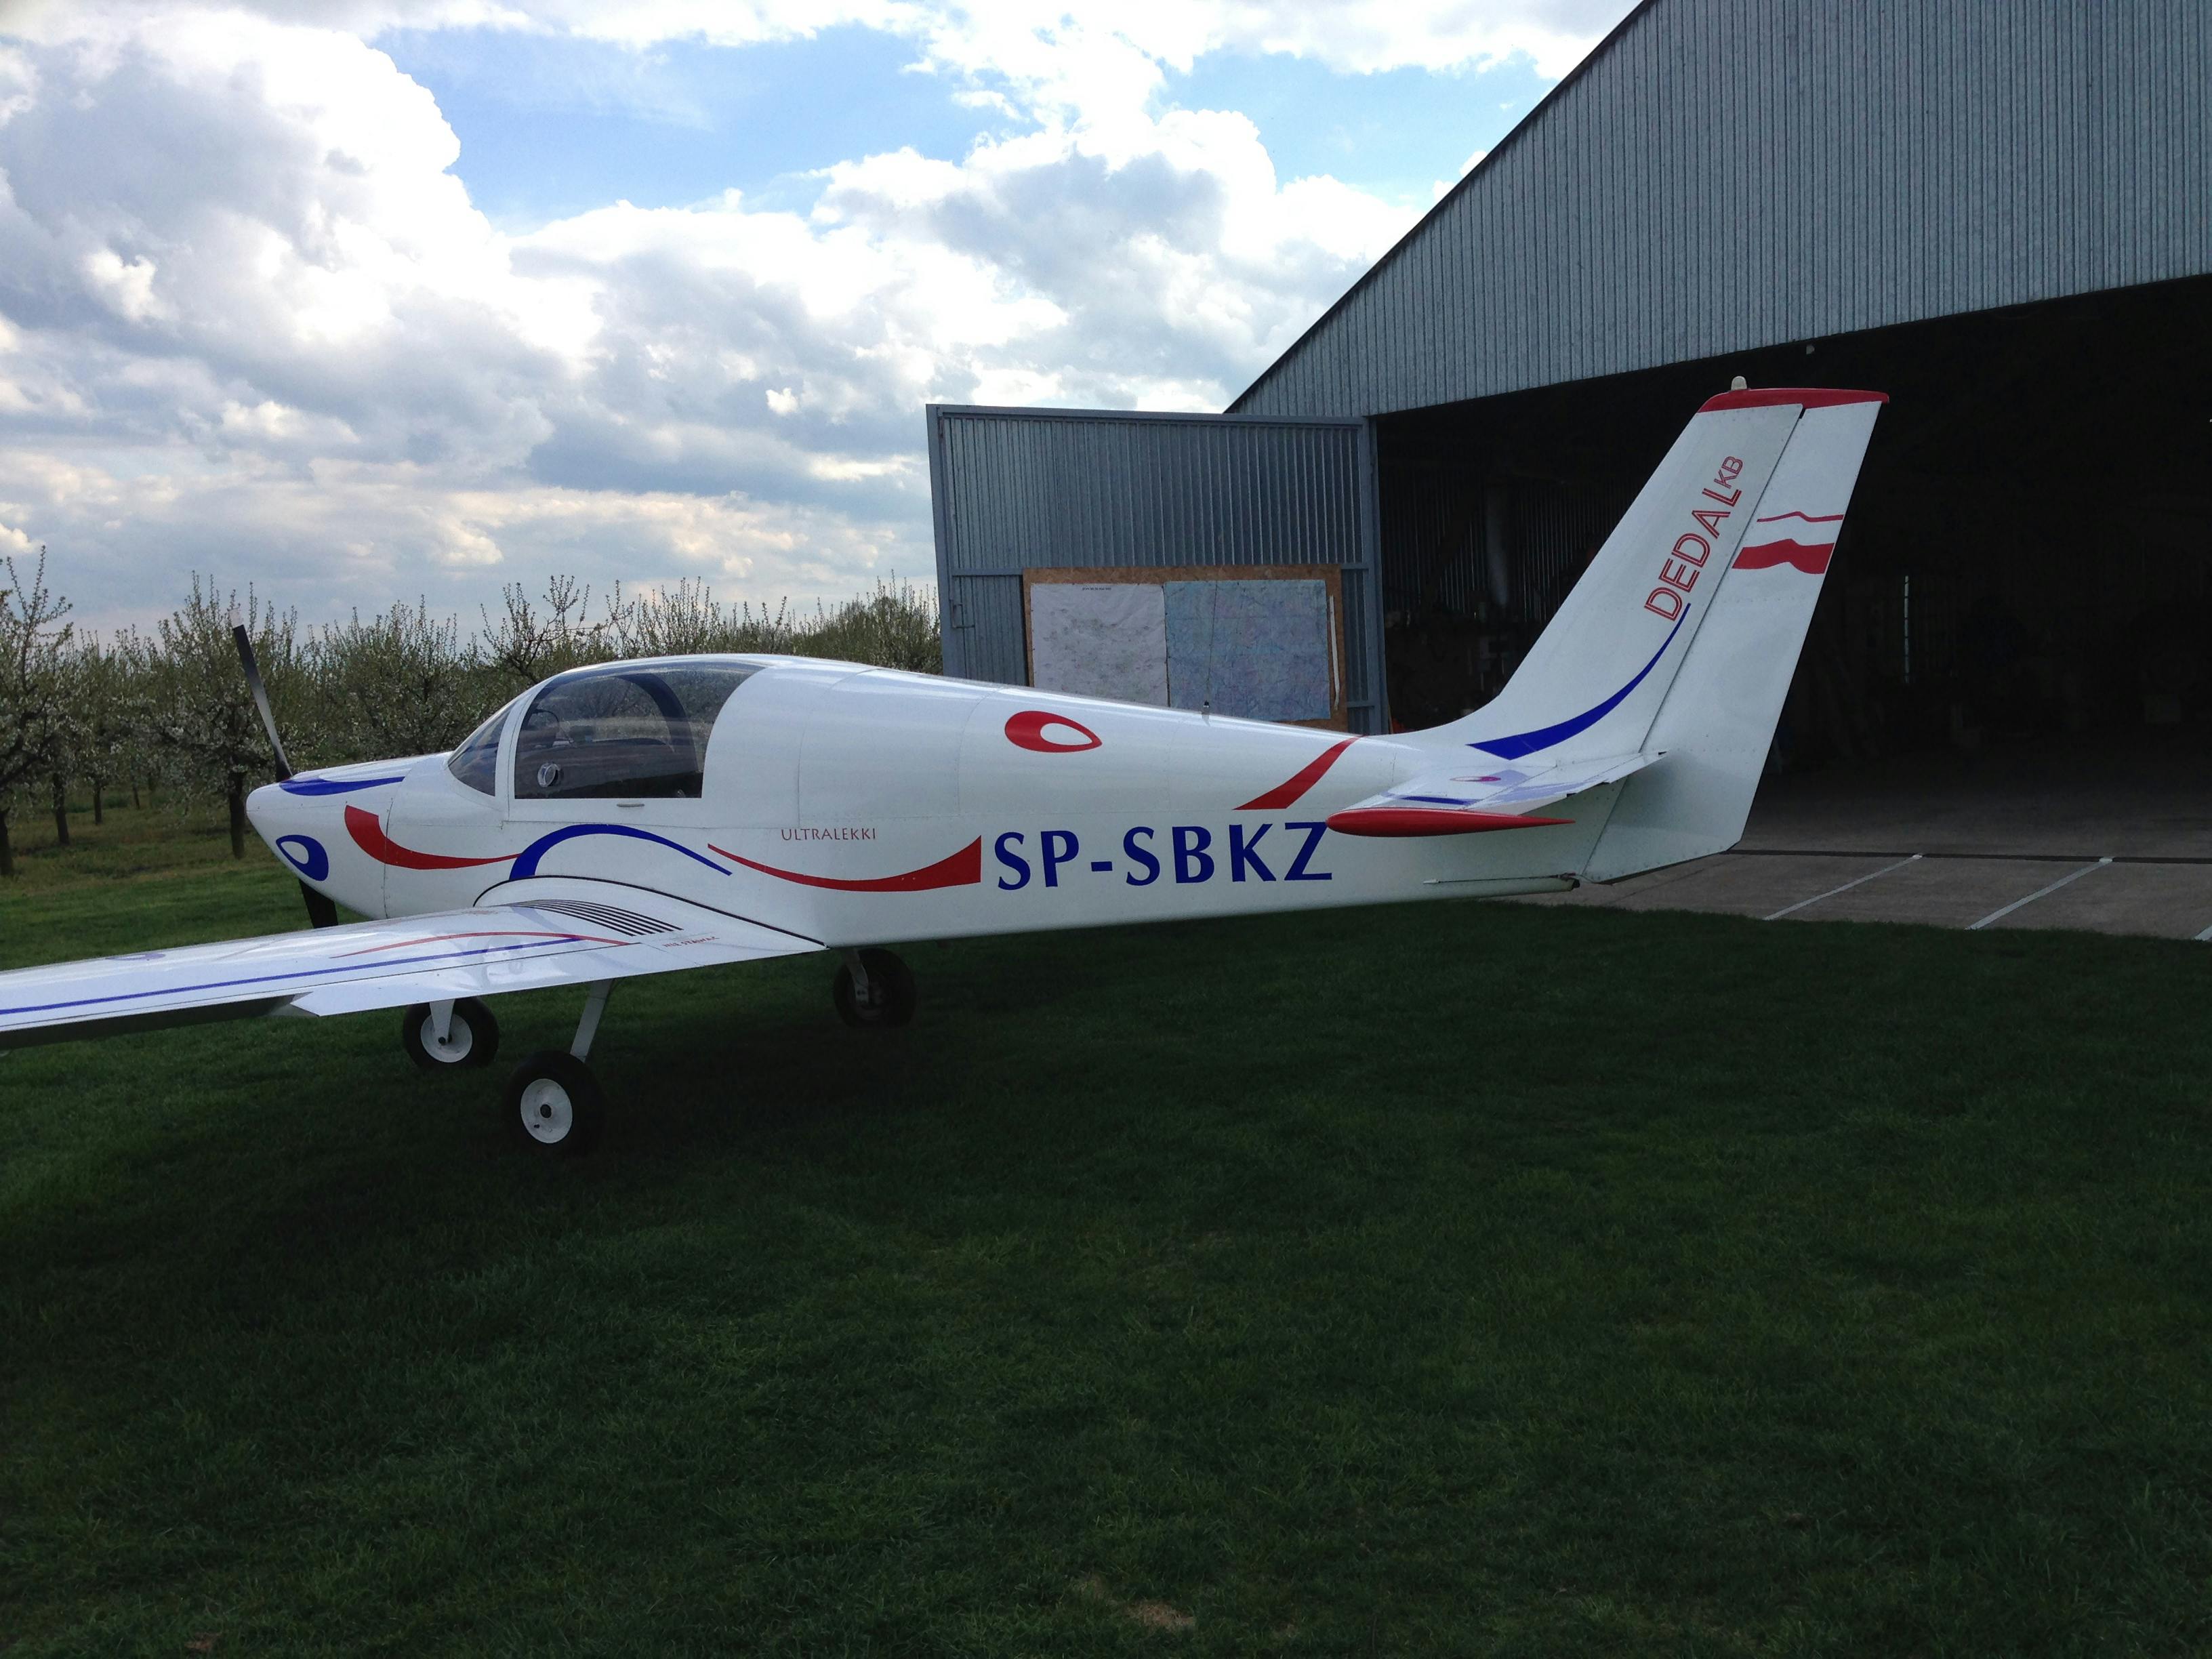 Chojeński, 2014. The DEDAL airplane at the Chojeński Airfield, standing in front of the main hangar.